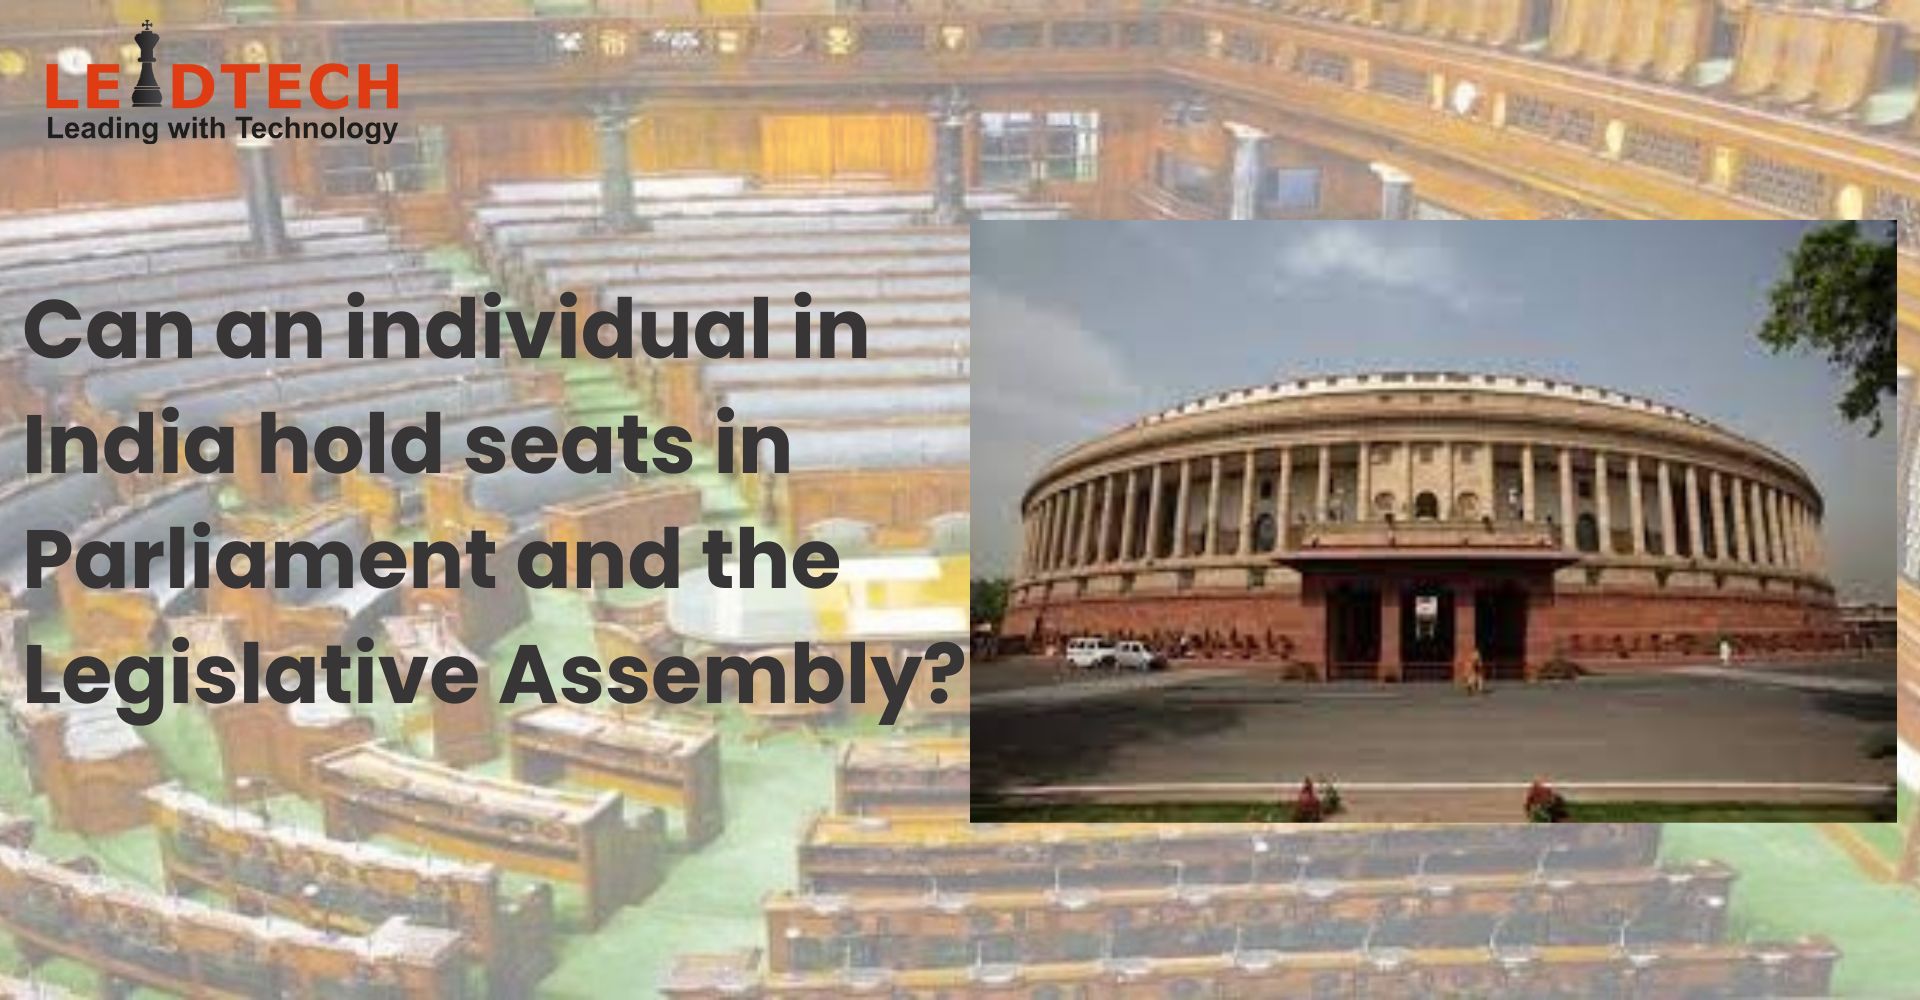 Can an individual in India hold seats in Parliament and the Legislative Assembly?